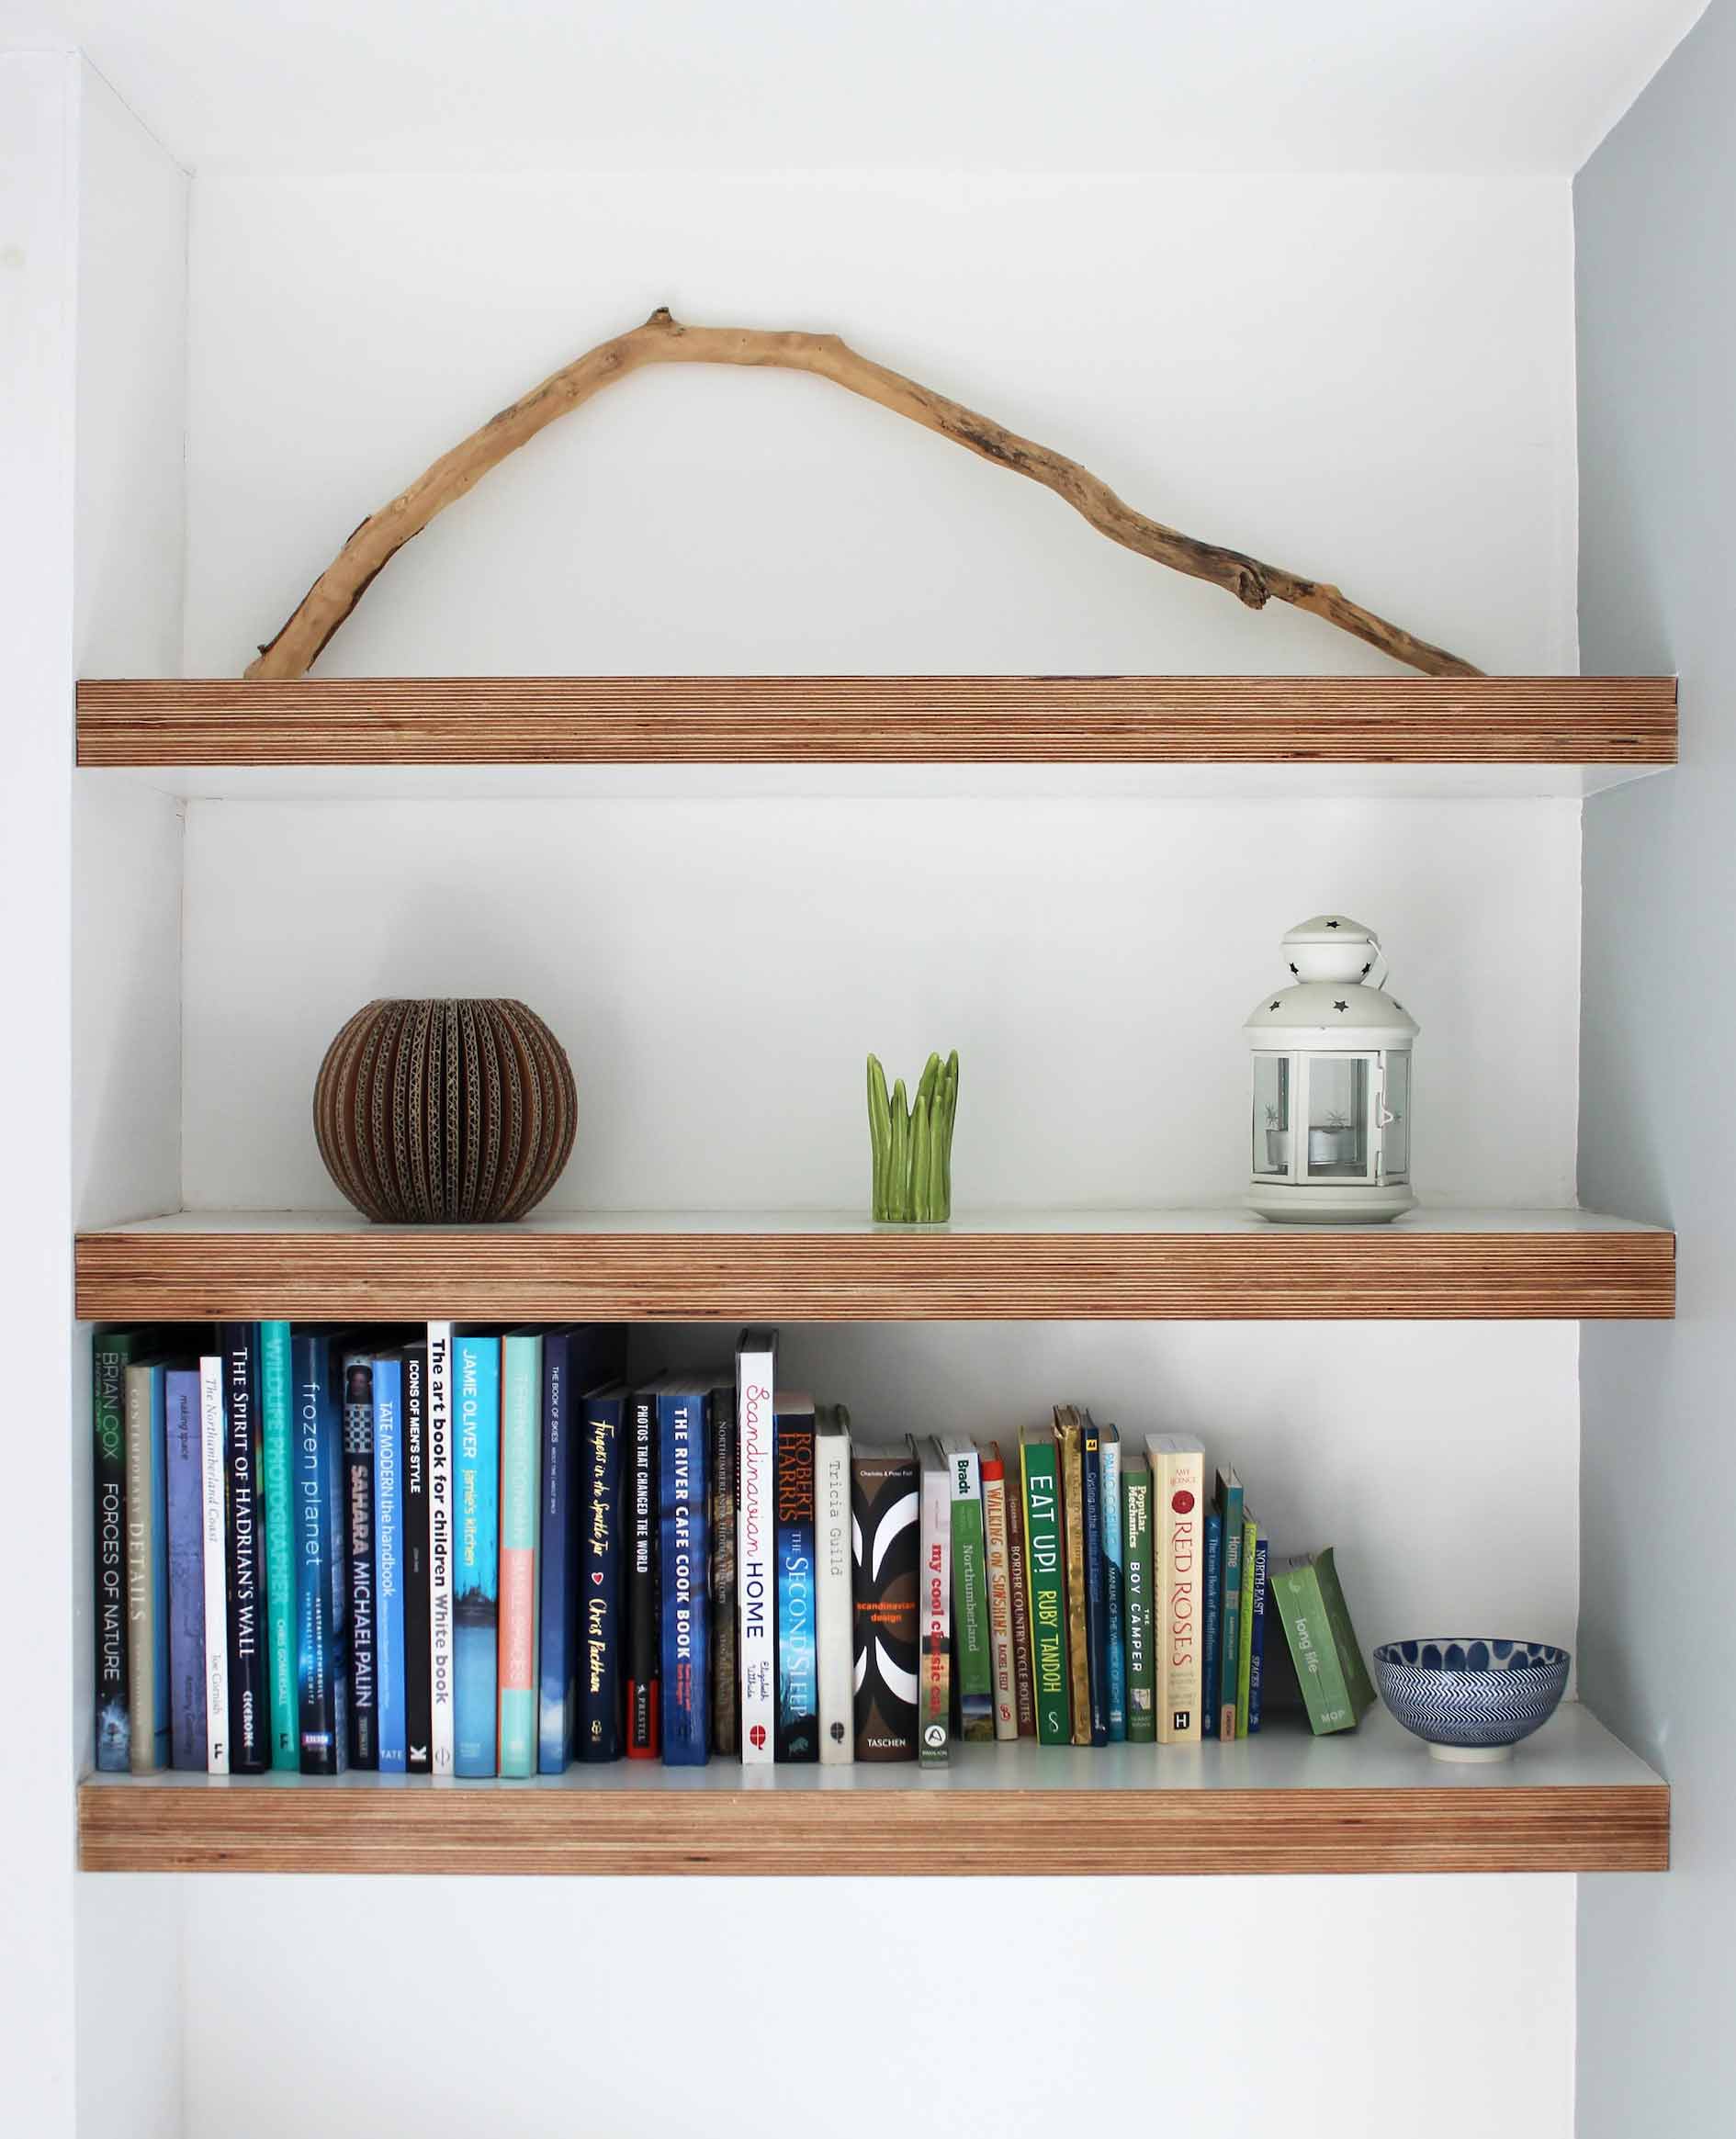 Three wooden shelves with books and a tree stick